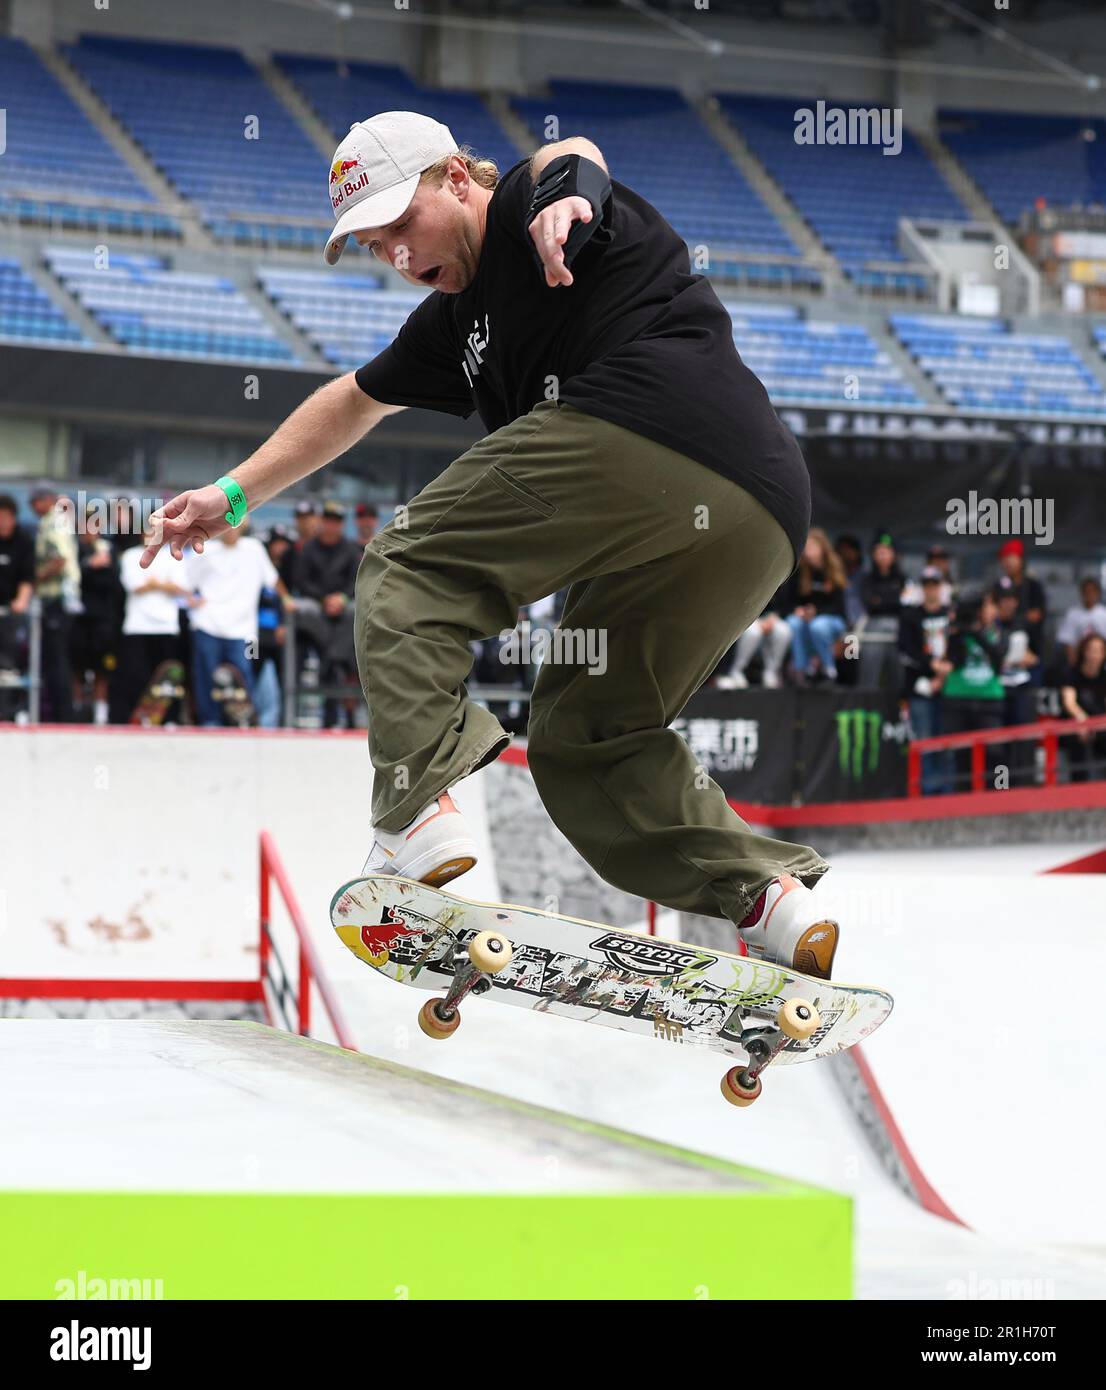 https://c8.alamy.com/comp/2R1H70T/jamie-foy-of-the-usaperforms-during-the-mens-skateboarding-street-final-of-x-games-chiba-2023-at-zozo-marine-stadium-in-chiba-city-chiba-prefecture-on-may-14-2023foy-finished-3rd-place-in-the-event-the-yomiuri-shimbun-via-ap-images-2R1H70T.jpg